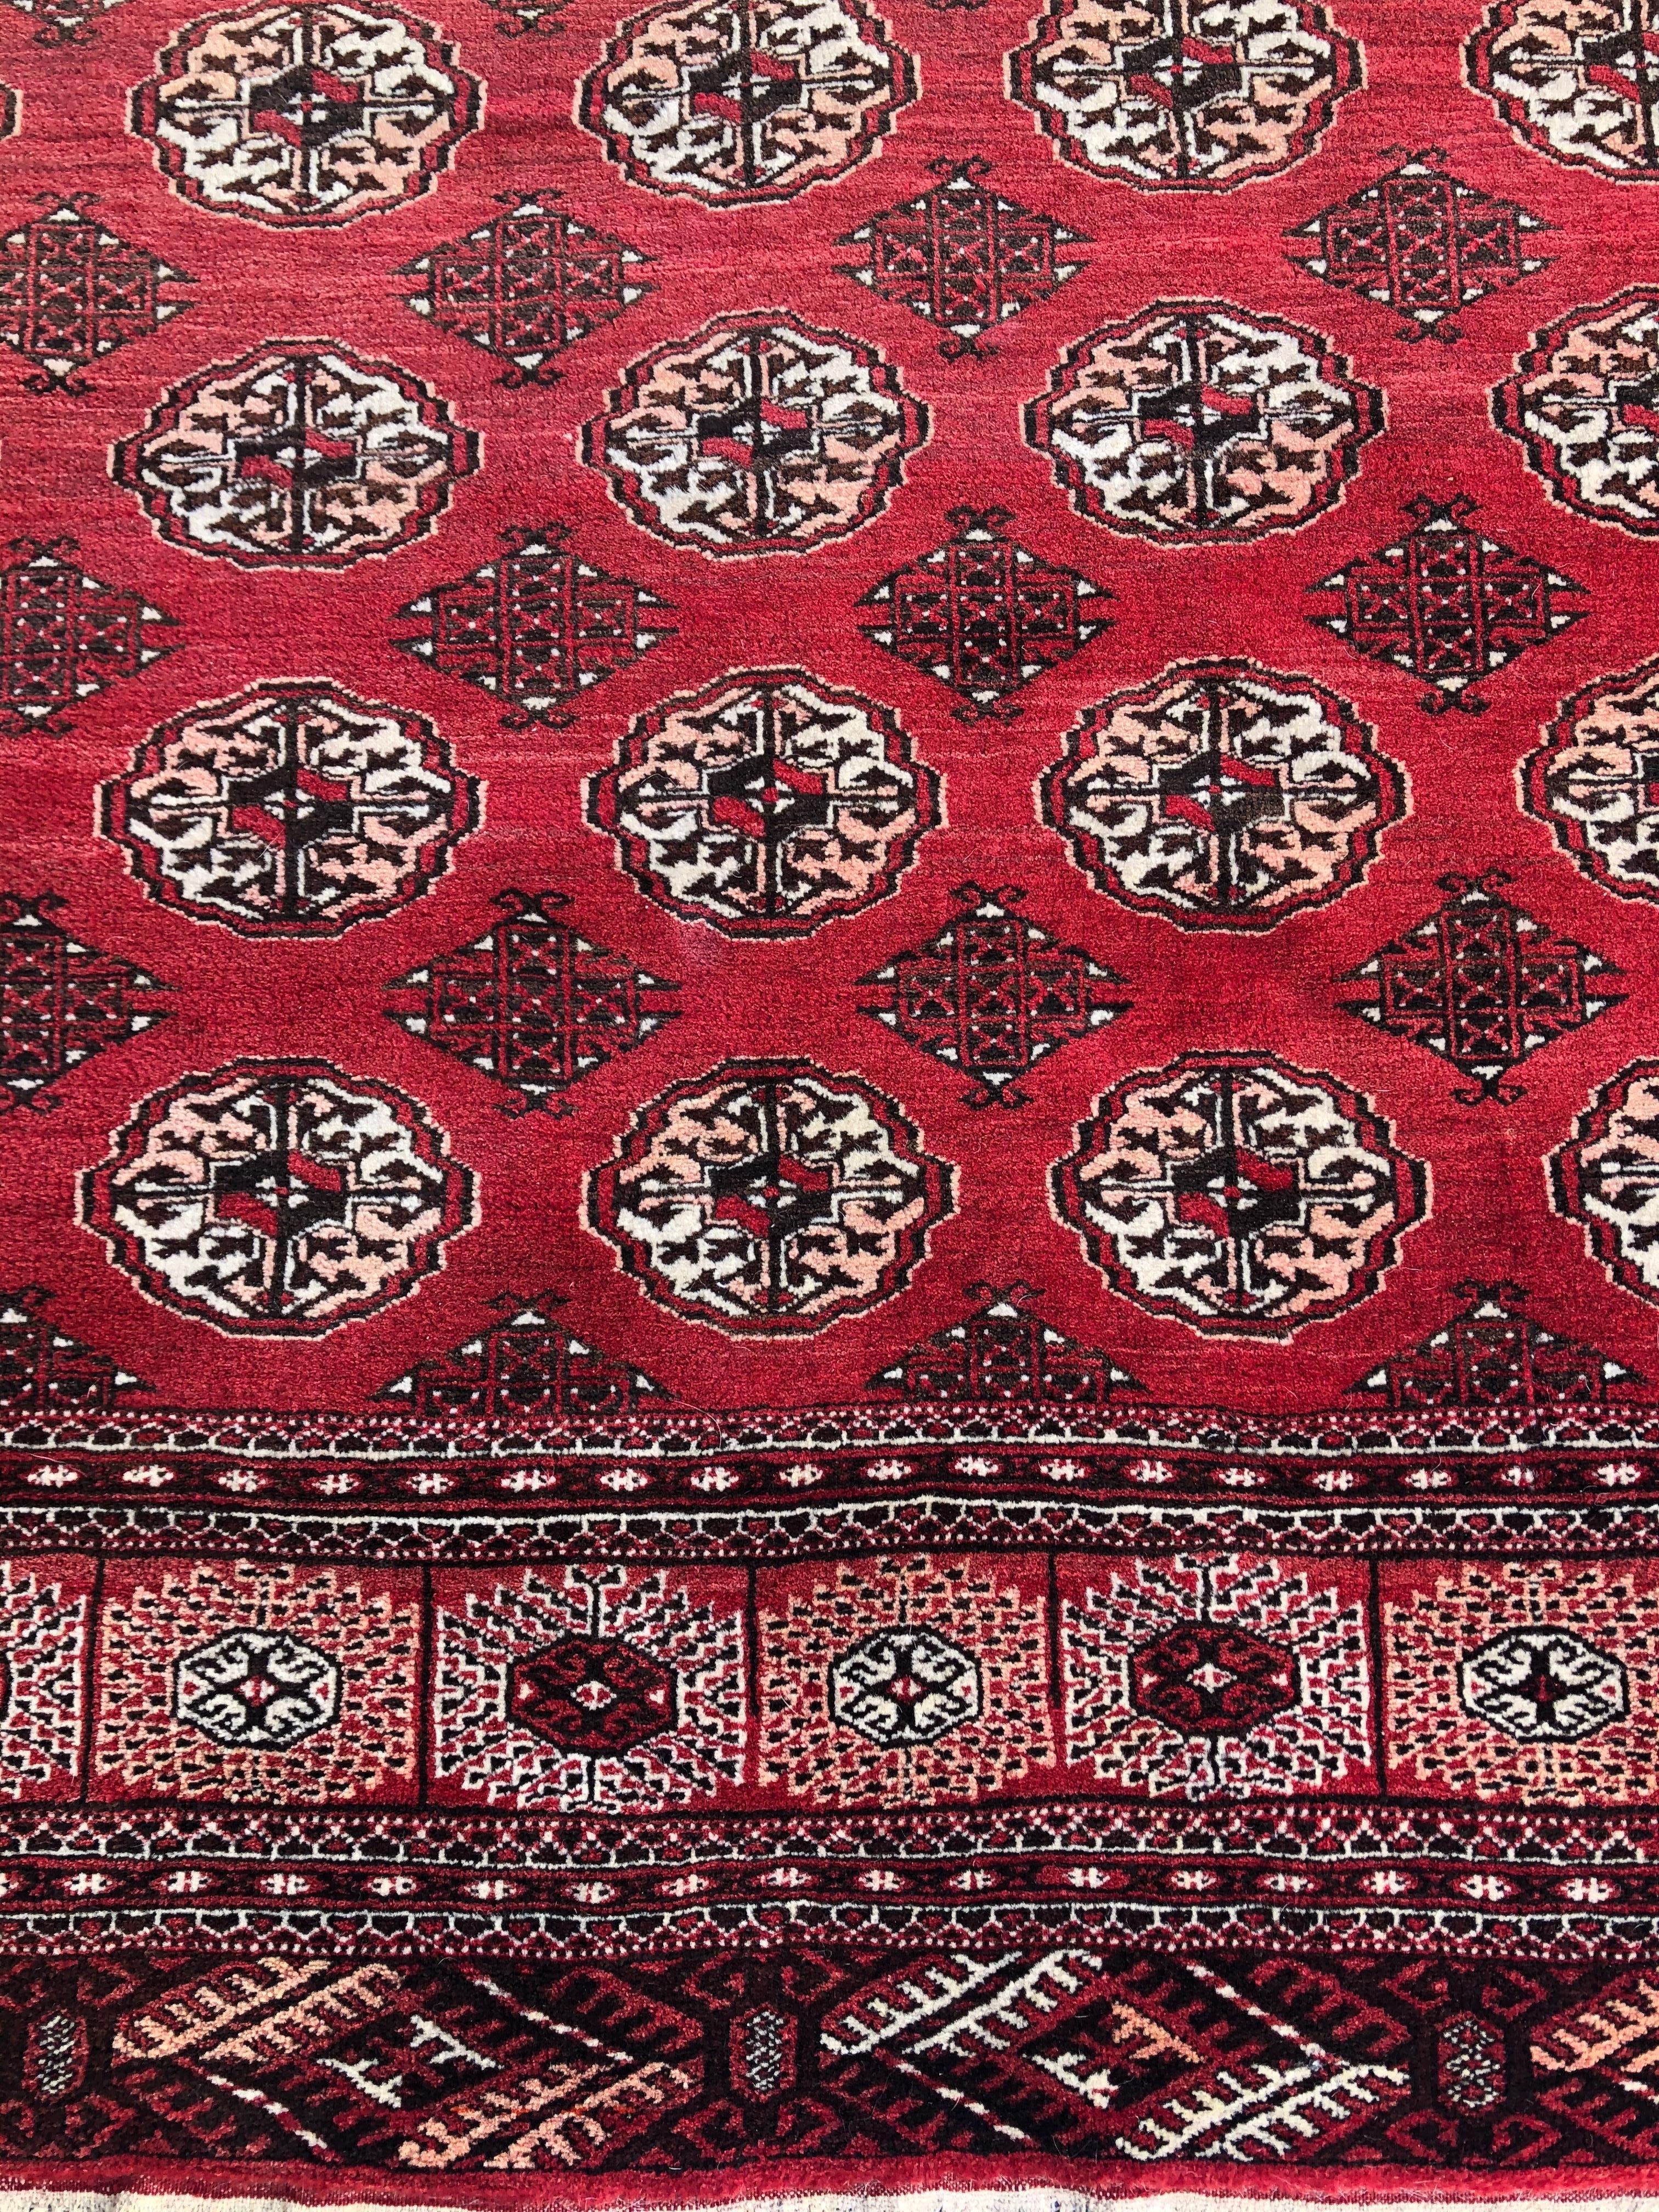 This traditional beautiful rug features a multitude of beautifully angular elements, chosen for their presence with the rich colors and characteristic octagonal Ersari tribal guls. A wonderful palette is present, mixing vivacious reds, creamy whites